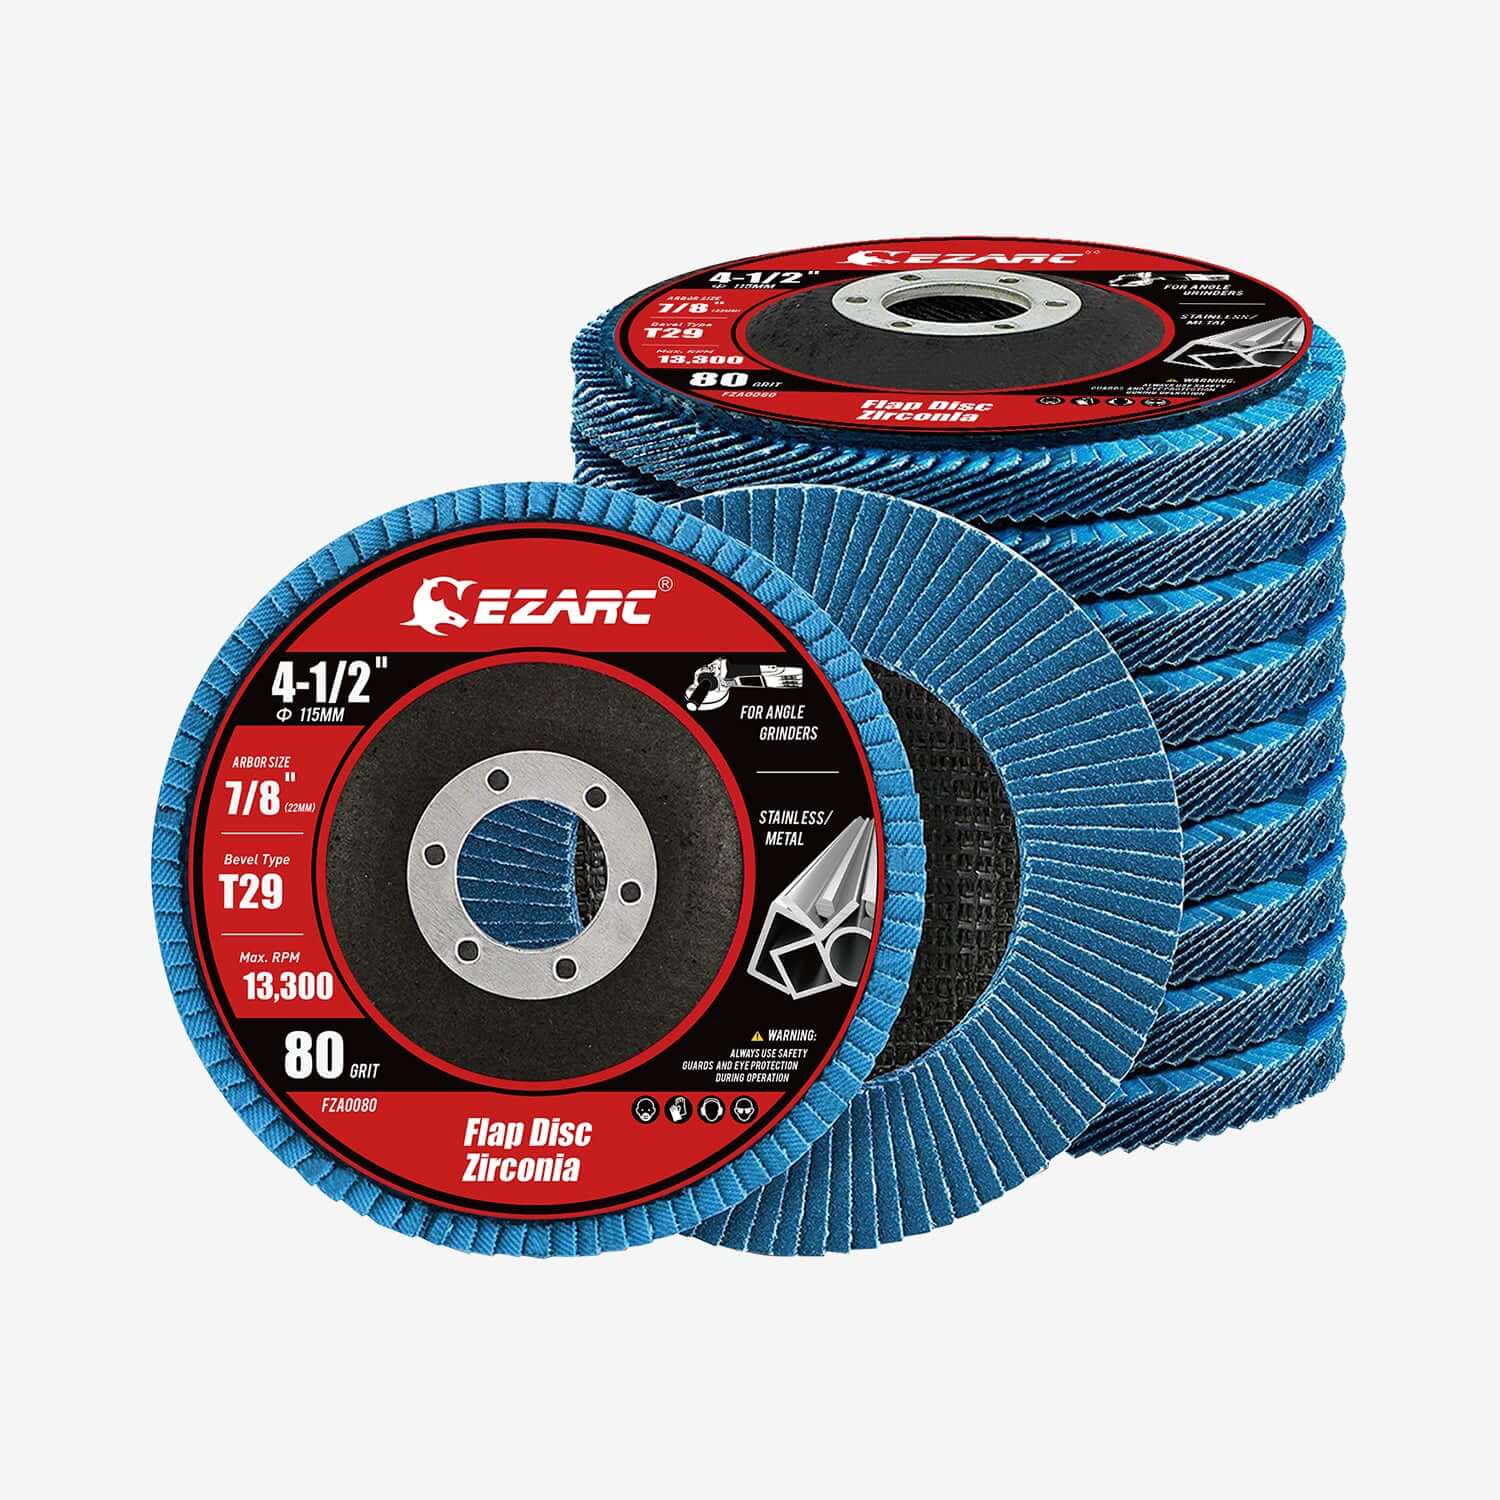 4-1/2 In. T29 Flap Discs For Stainless Steel, Sheet Metal,40/60/80/120 Grits